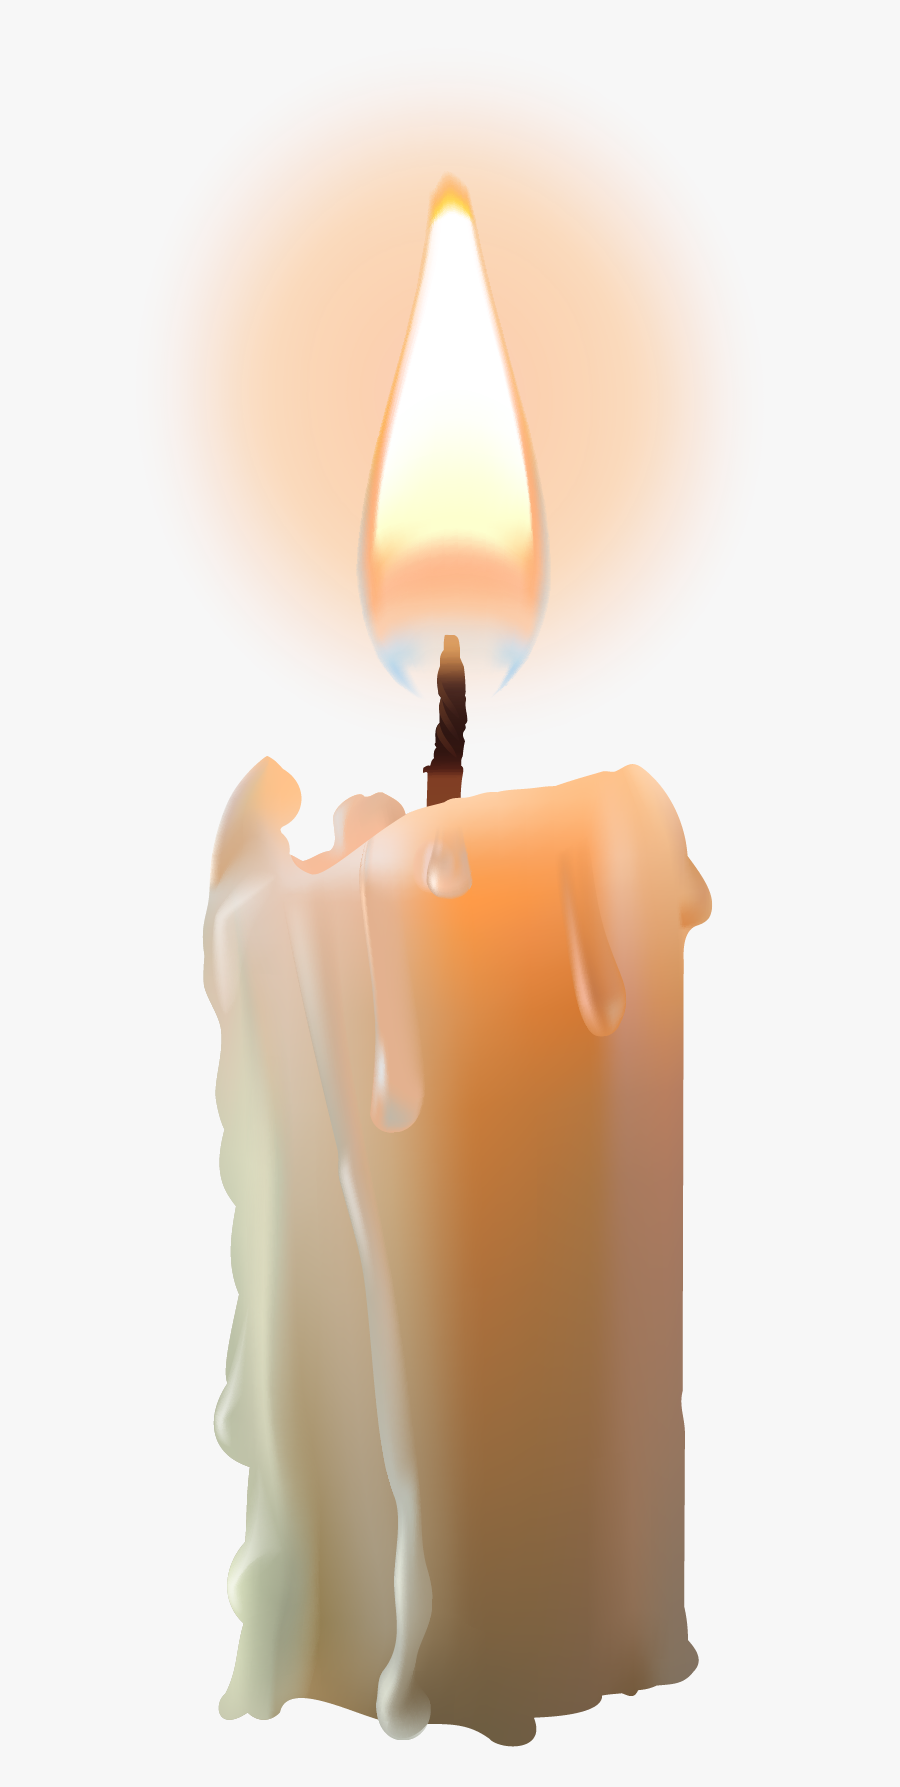 Bright Candle With Flame Png Image - Advent Candle, Transparent Clipart